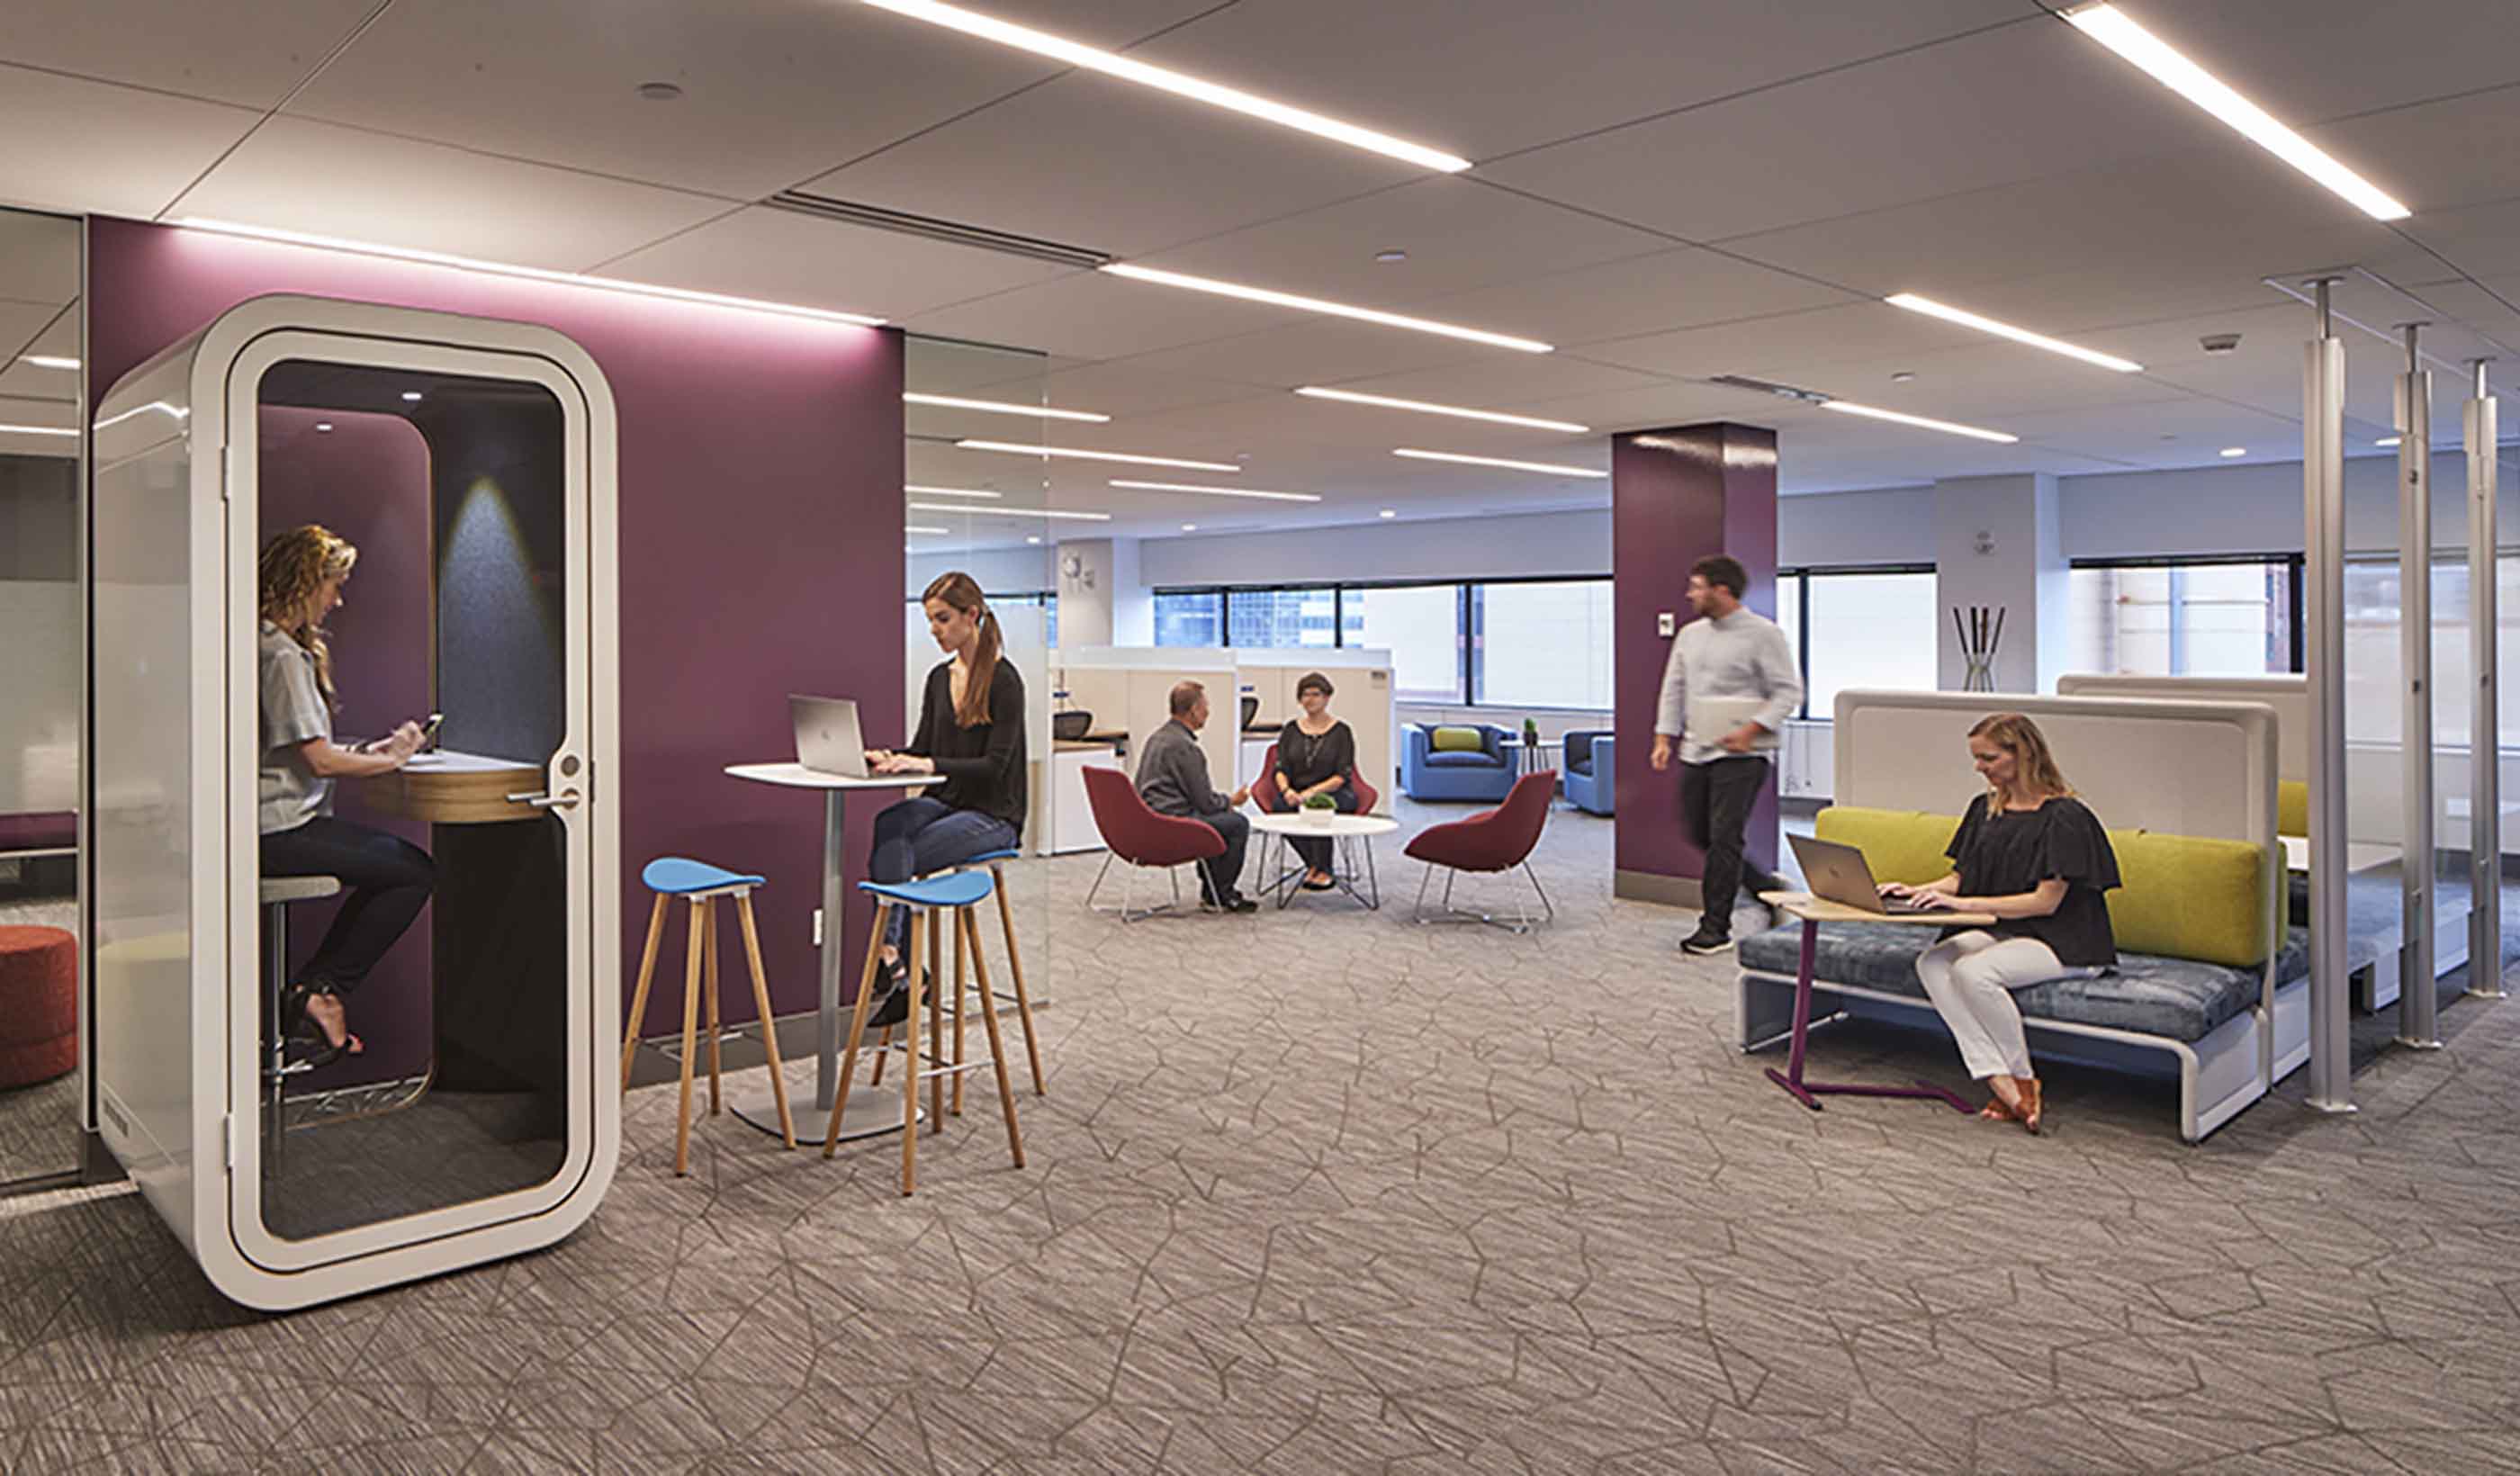 Open plan 2.0: Tips for a successful transition to a new open-office design